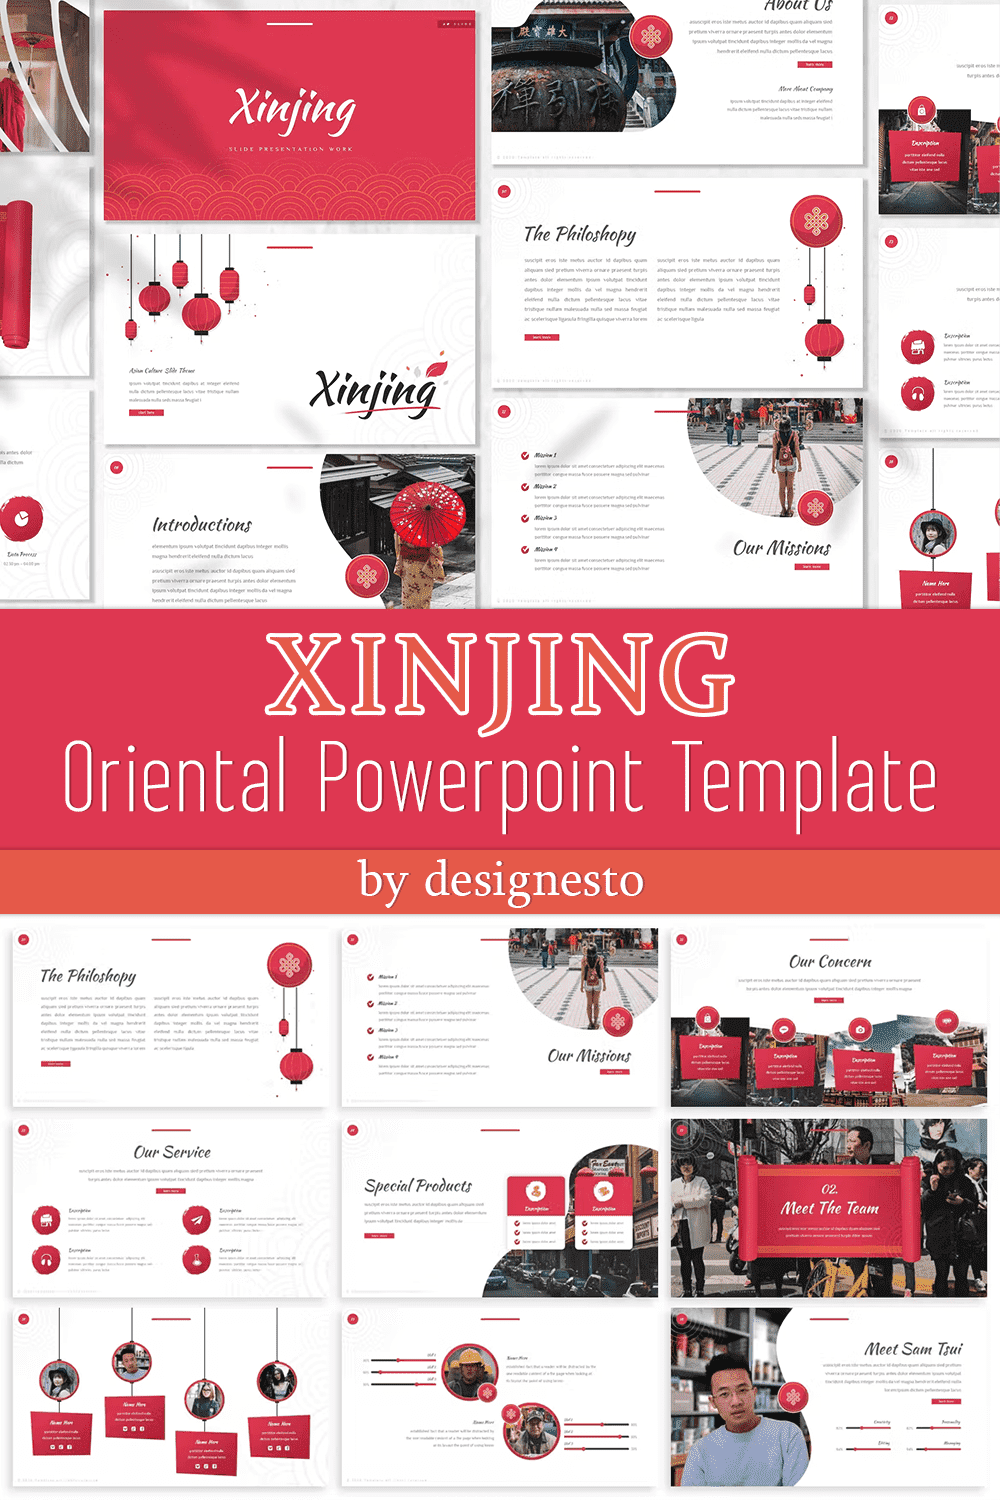 Xinjing oriental powerpoint template, picture for Pinterest.